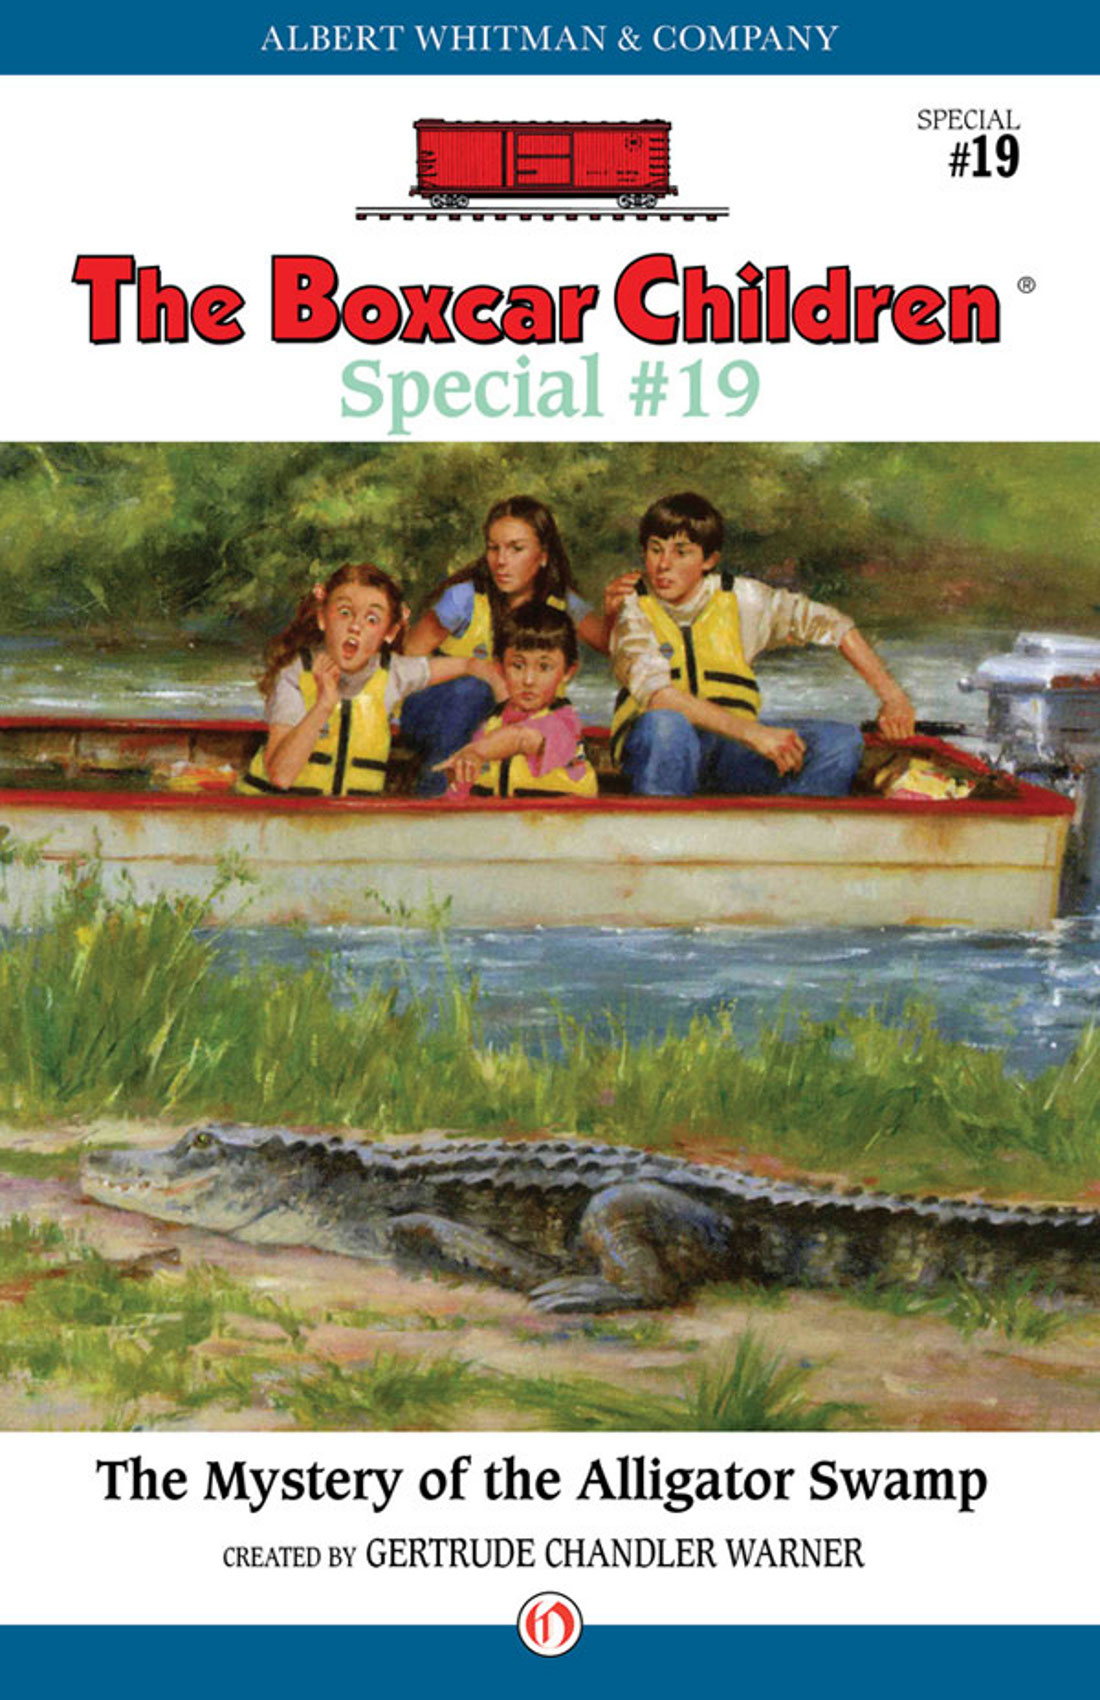 The Mystery of the Alligator Swamp